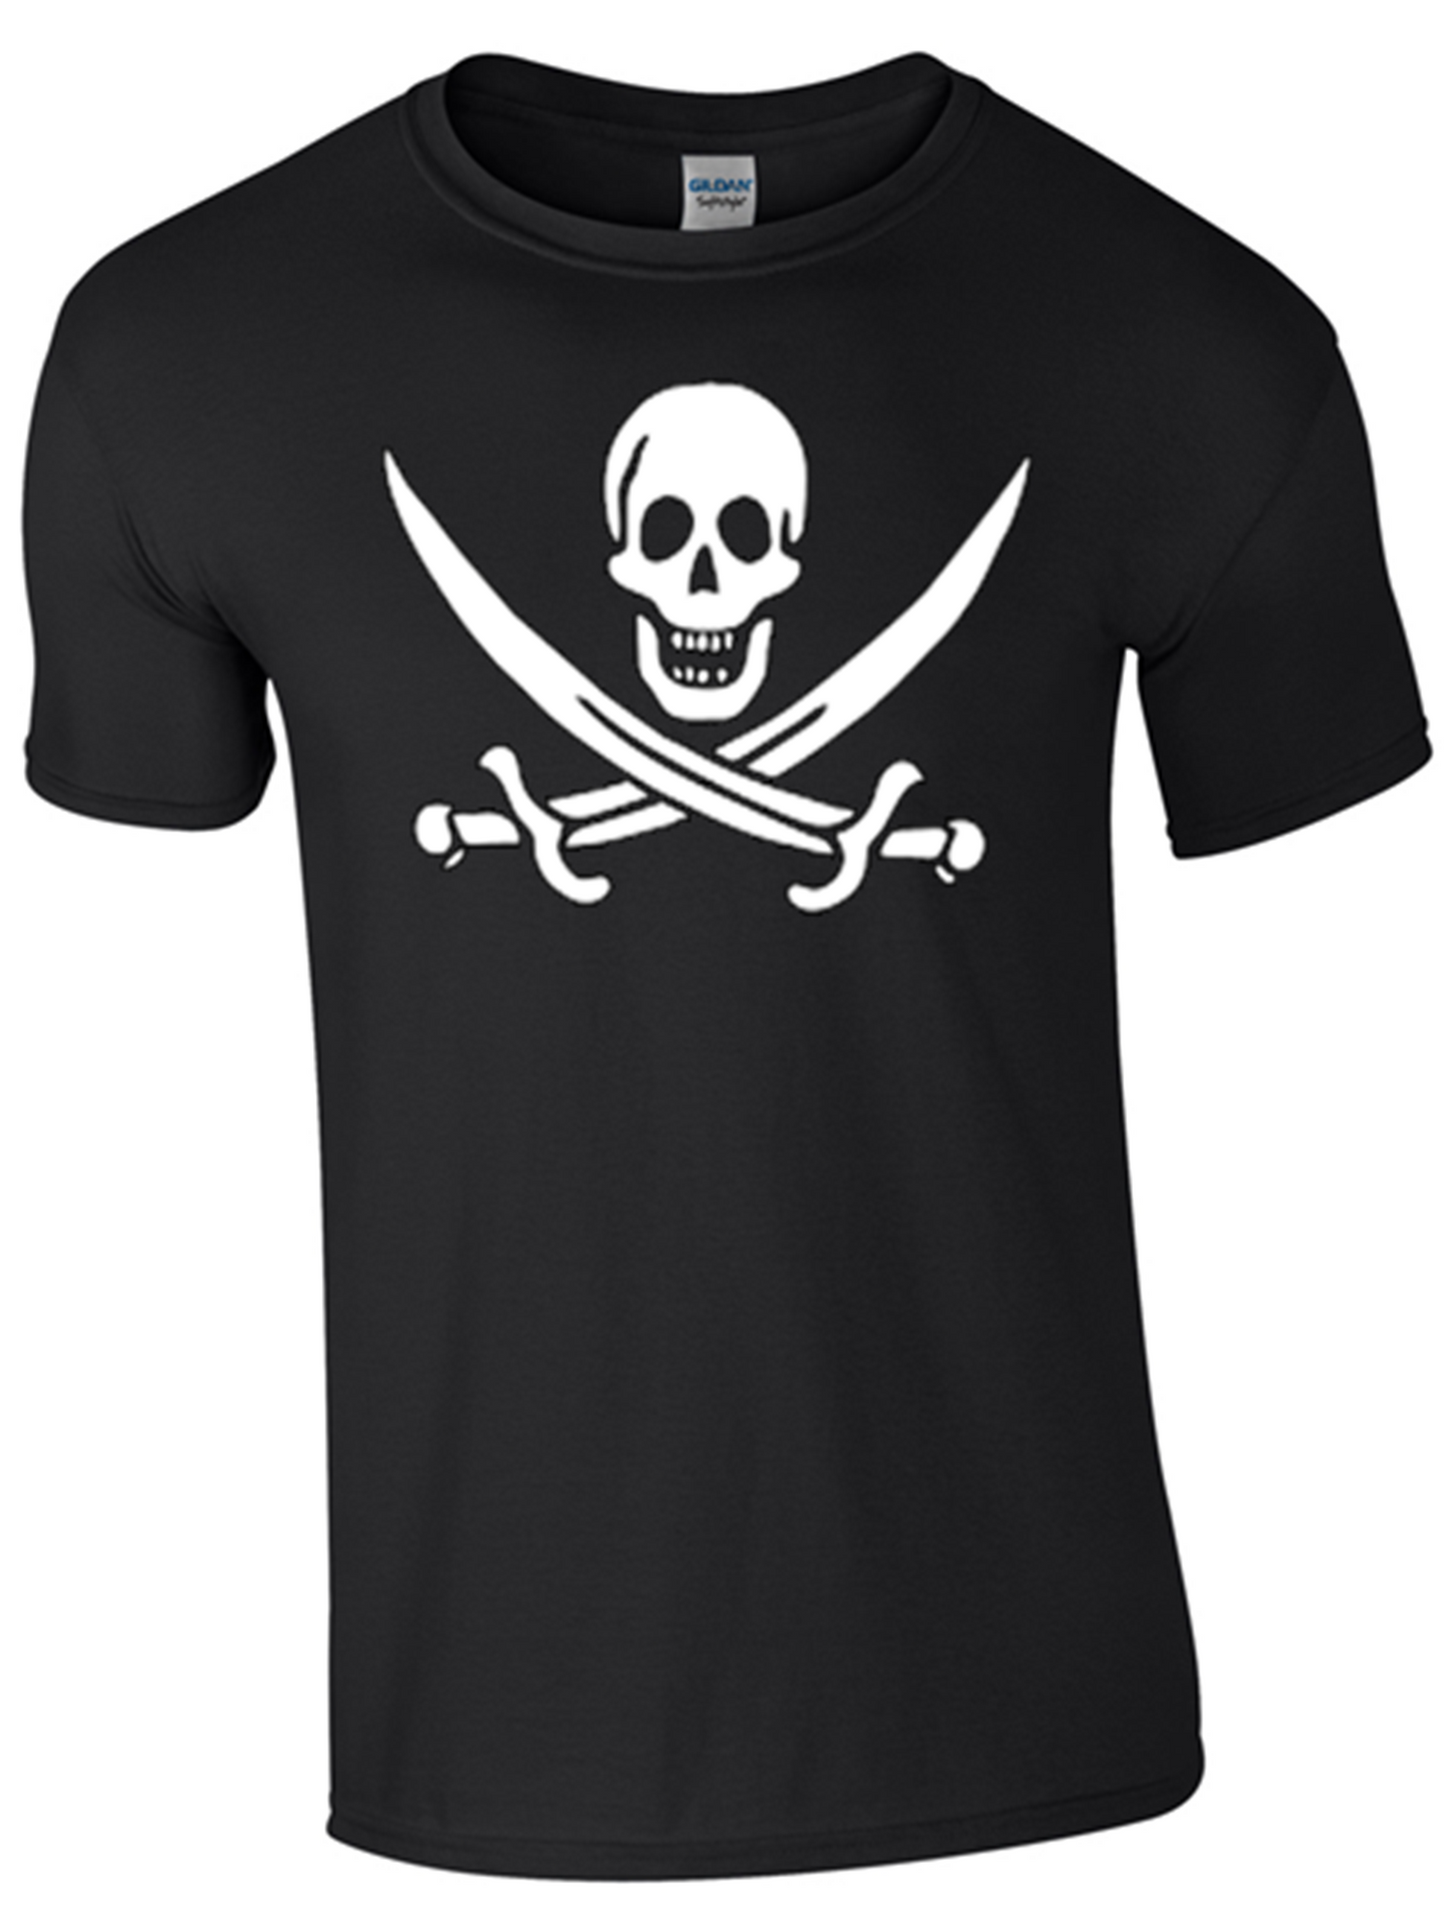 Pirate T-Shirt Printed DTG (Direct to Garment) for a Permanent Finish. - Army 1157 kit S / Black Army 1157 Kit Veterans Owned Business